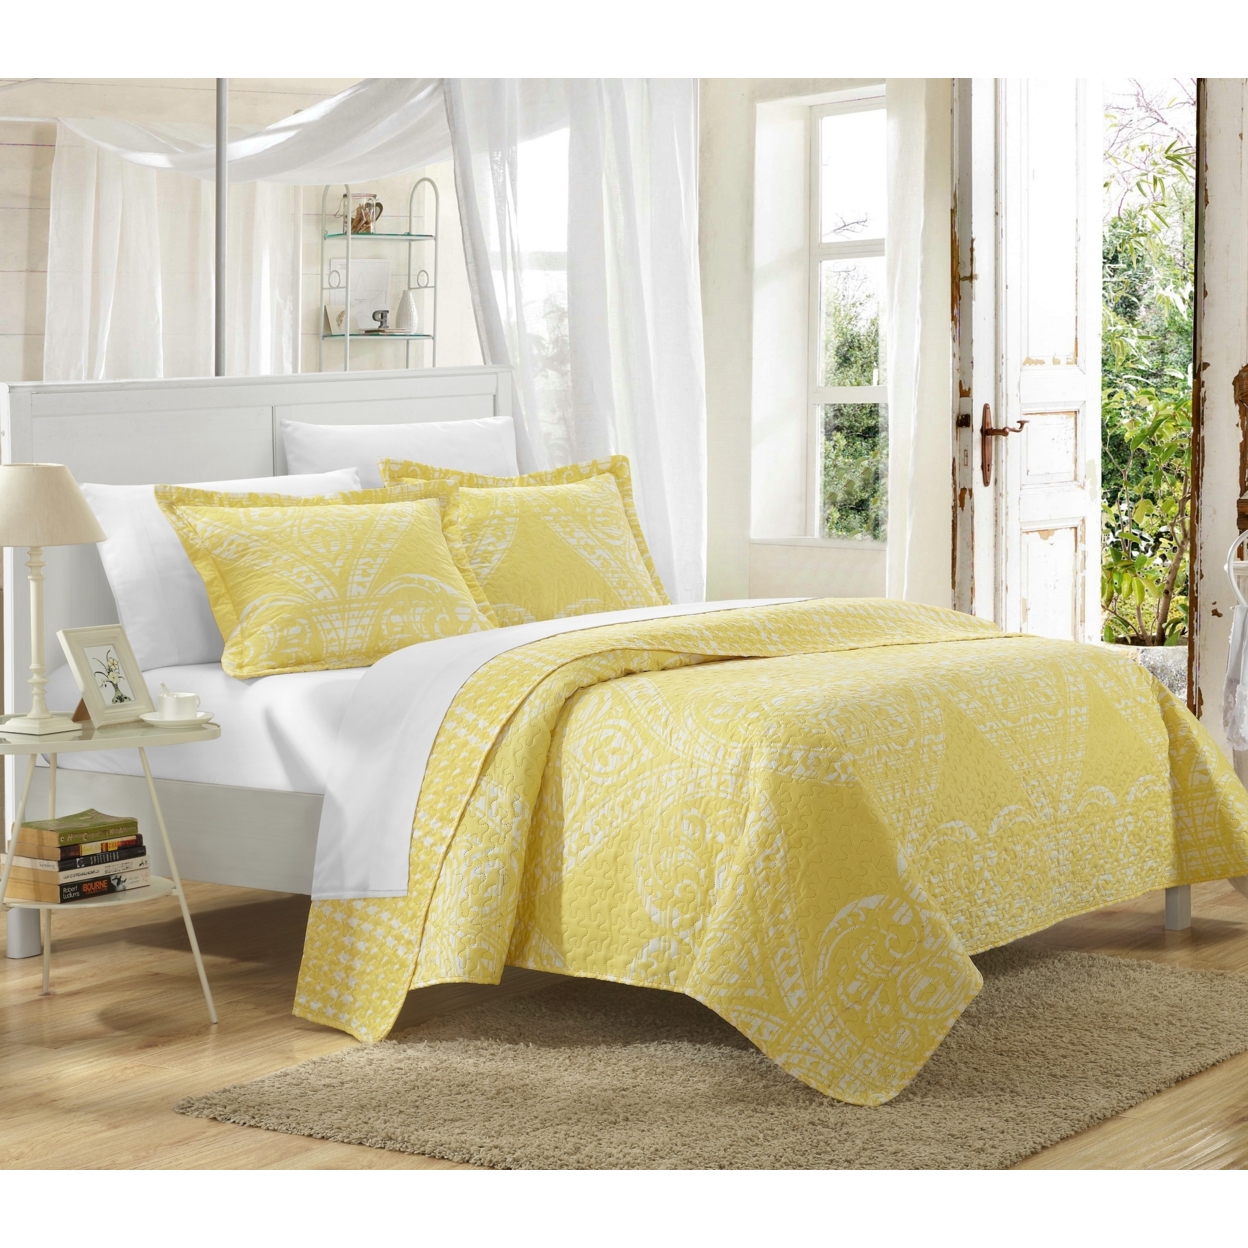 3 Or 2 Piece Revenna REVERSIBLE Printed Quilt Set. Front A Traditional Pattern And Reverses Into A Houndstooth Pattern - Yellow, Queen